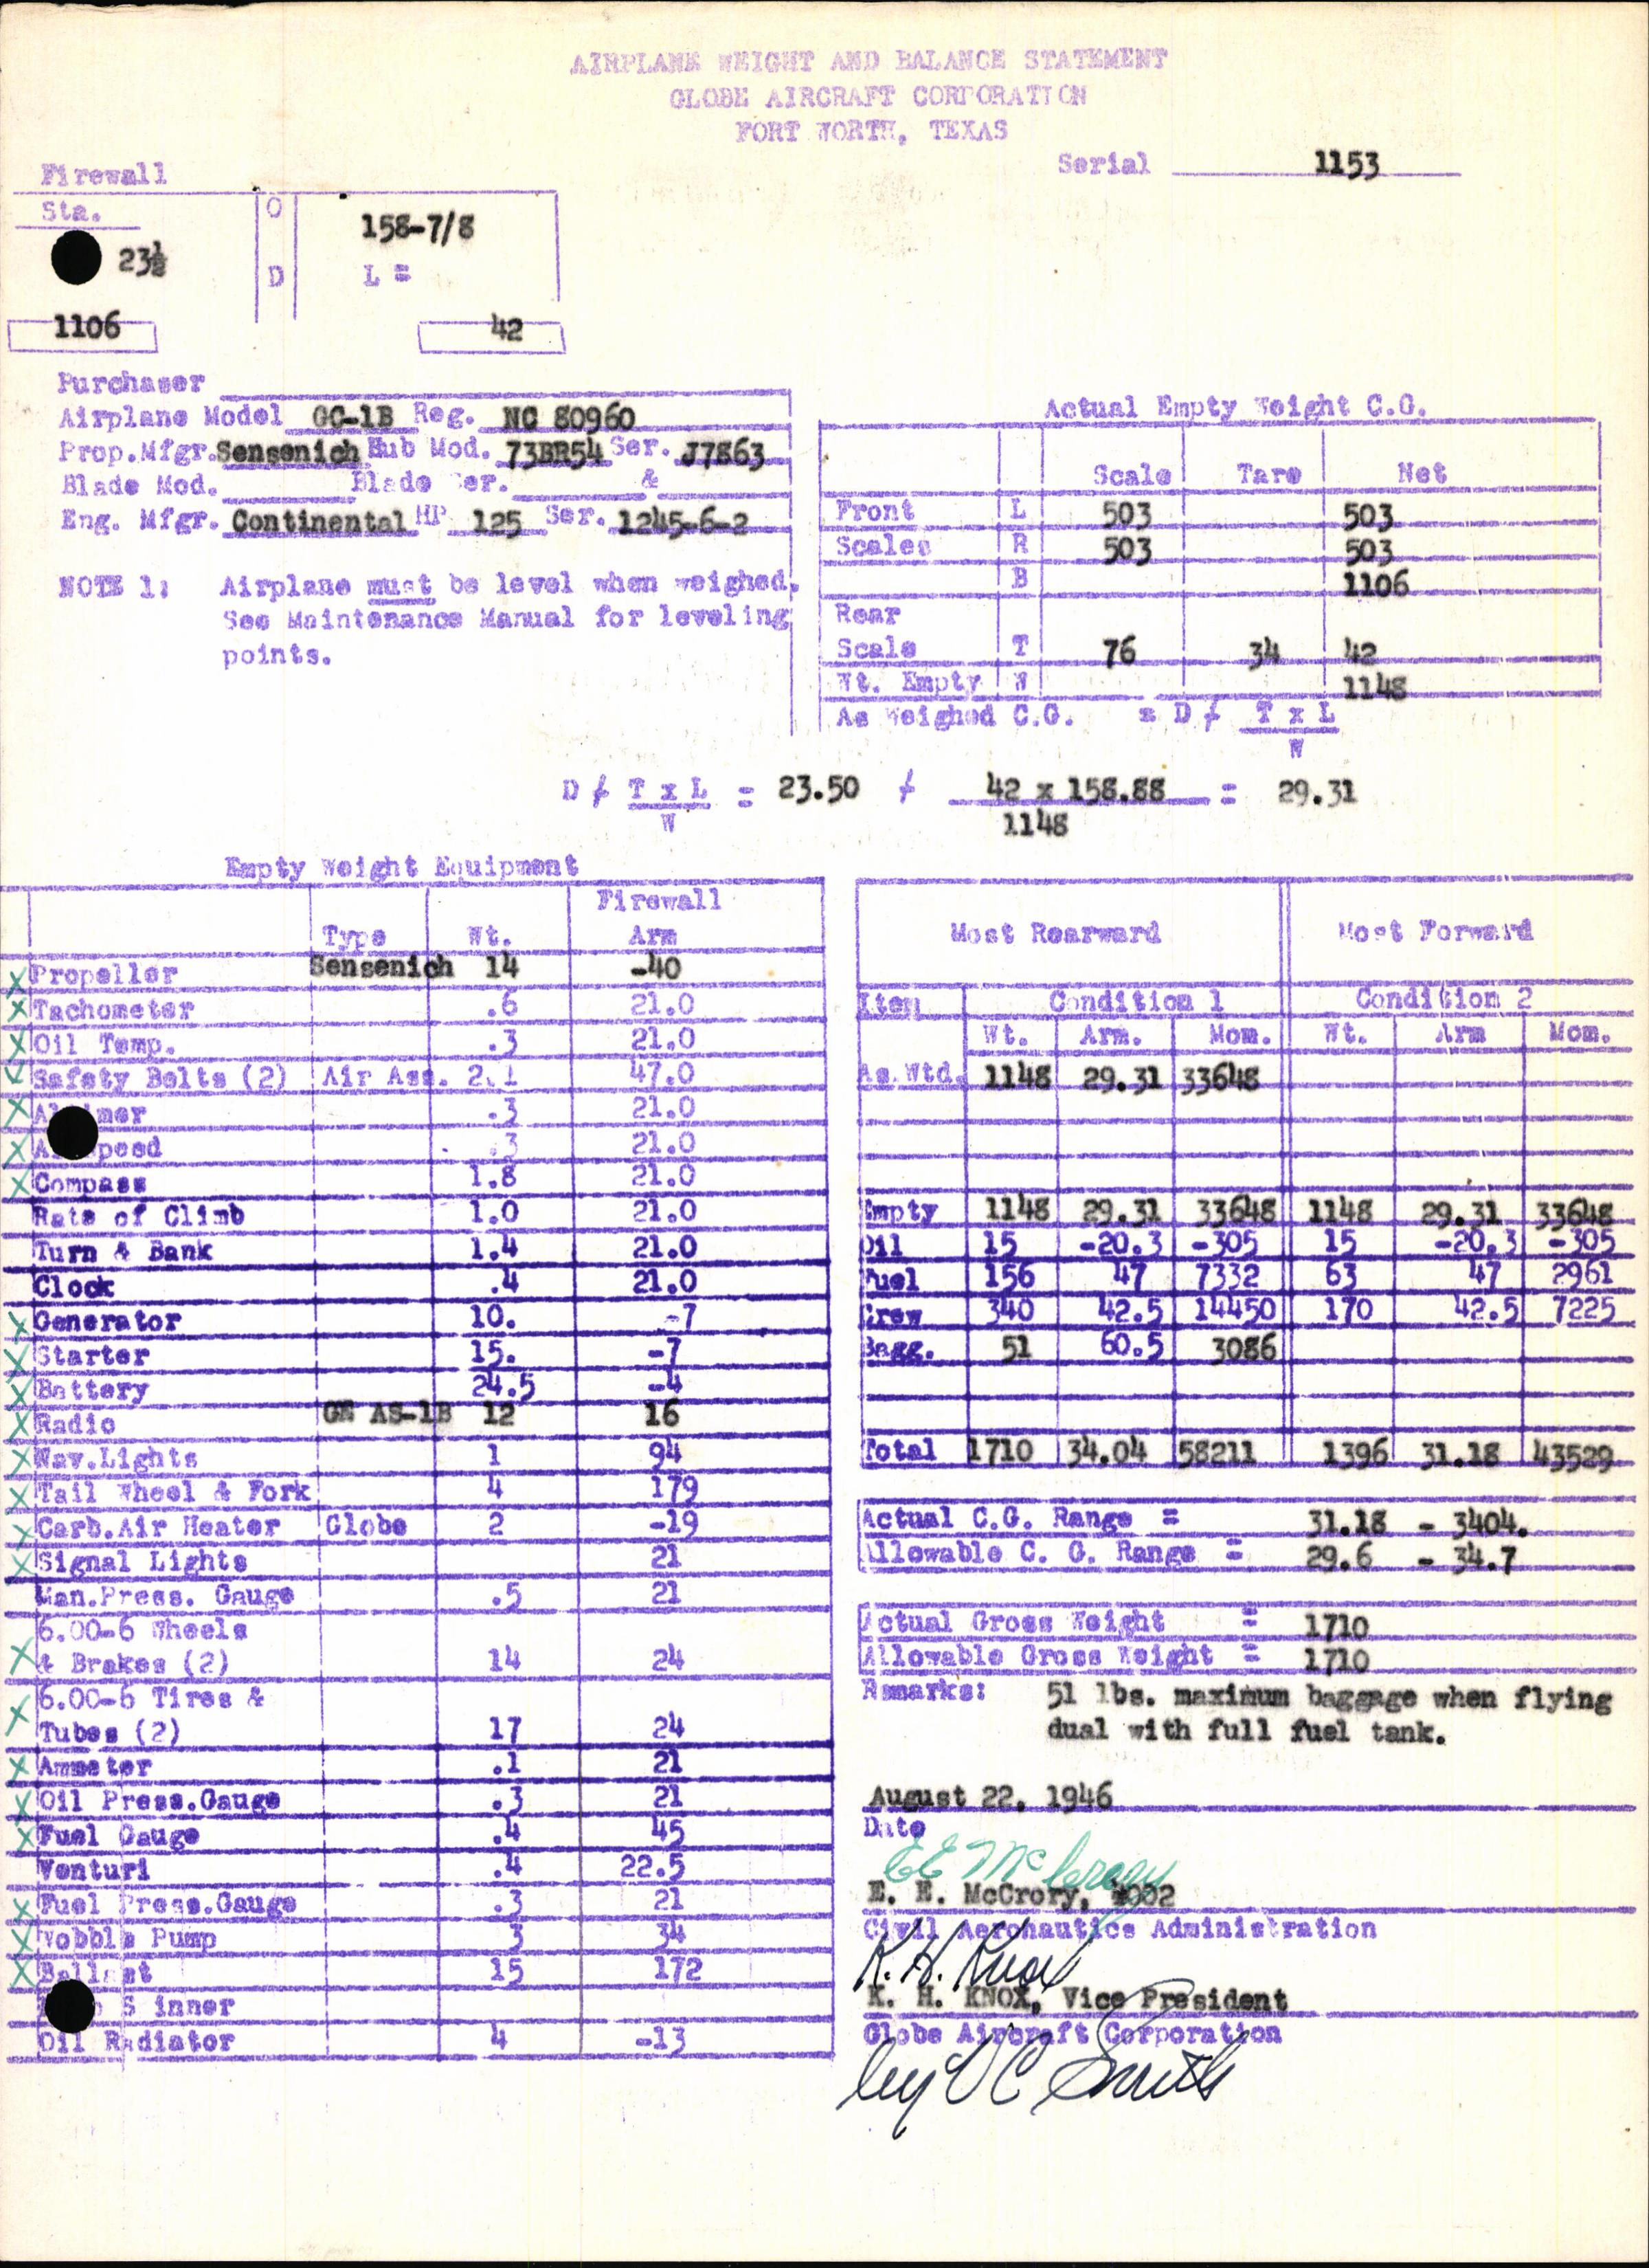 Sample page 5 from AirCorps Library document: Technical Information for Serial Number 1153